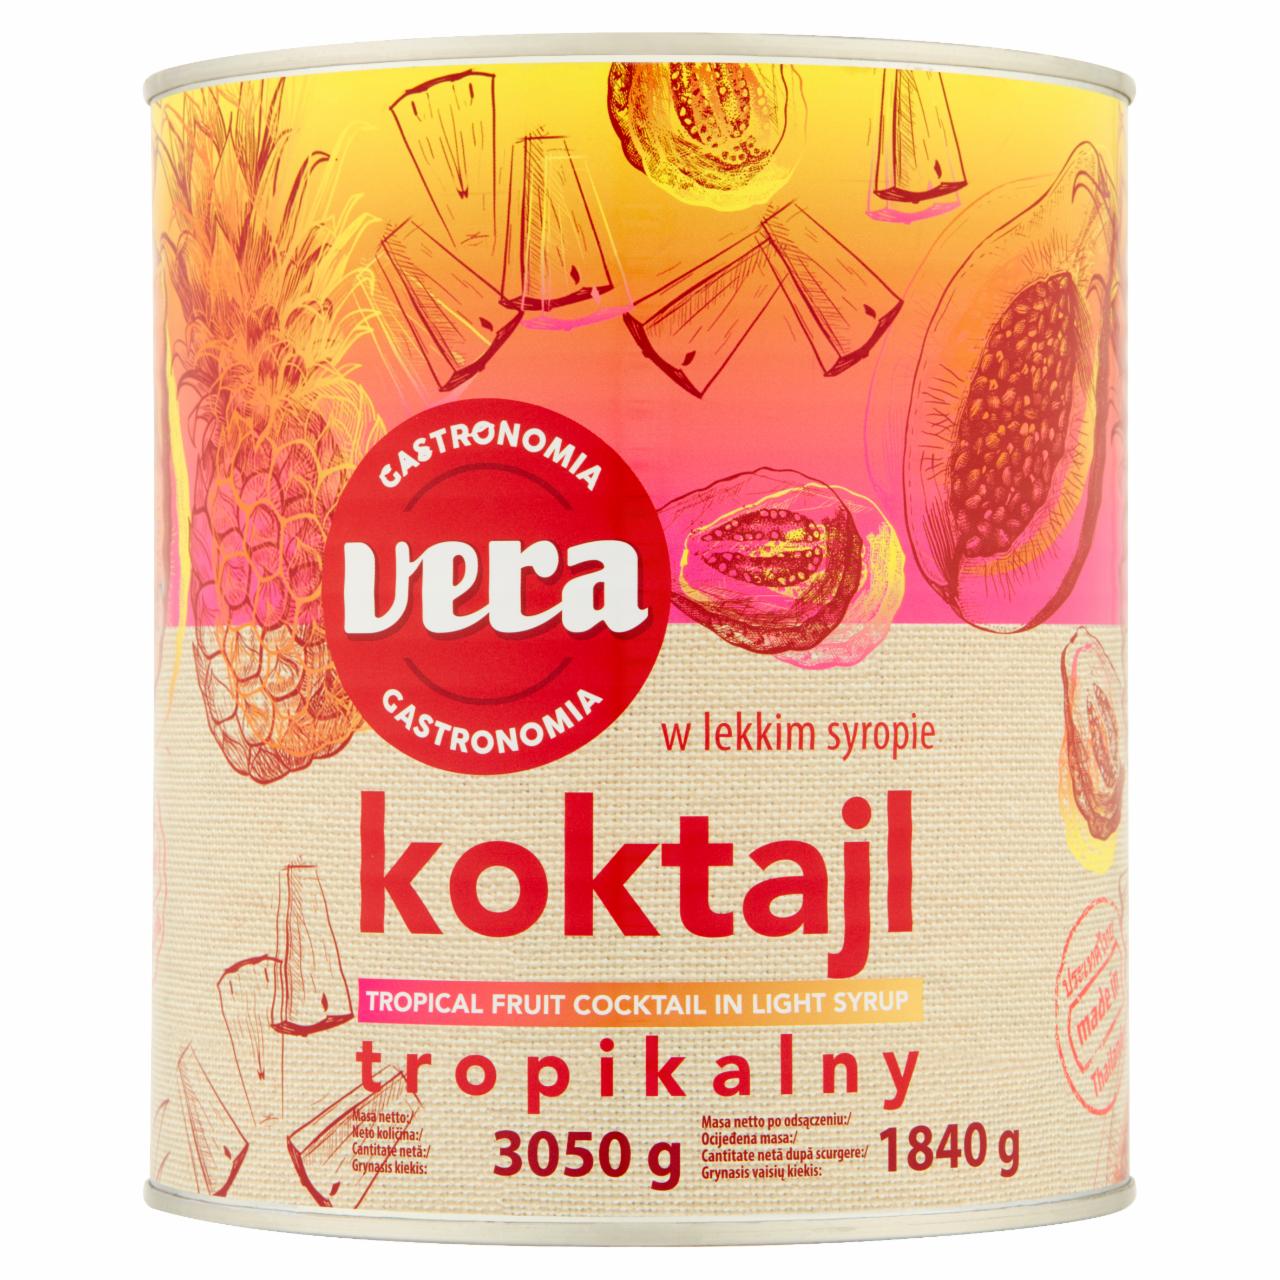 Photo - Vera Gastronomia Tropical Fruit Cocktail in Light Syrup 3050 g